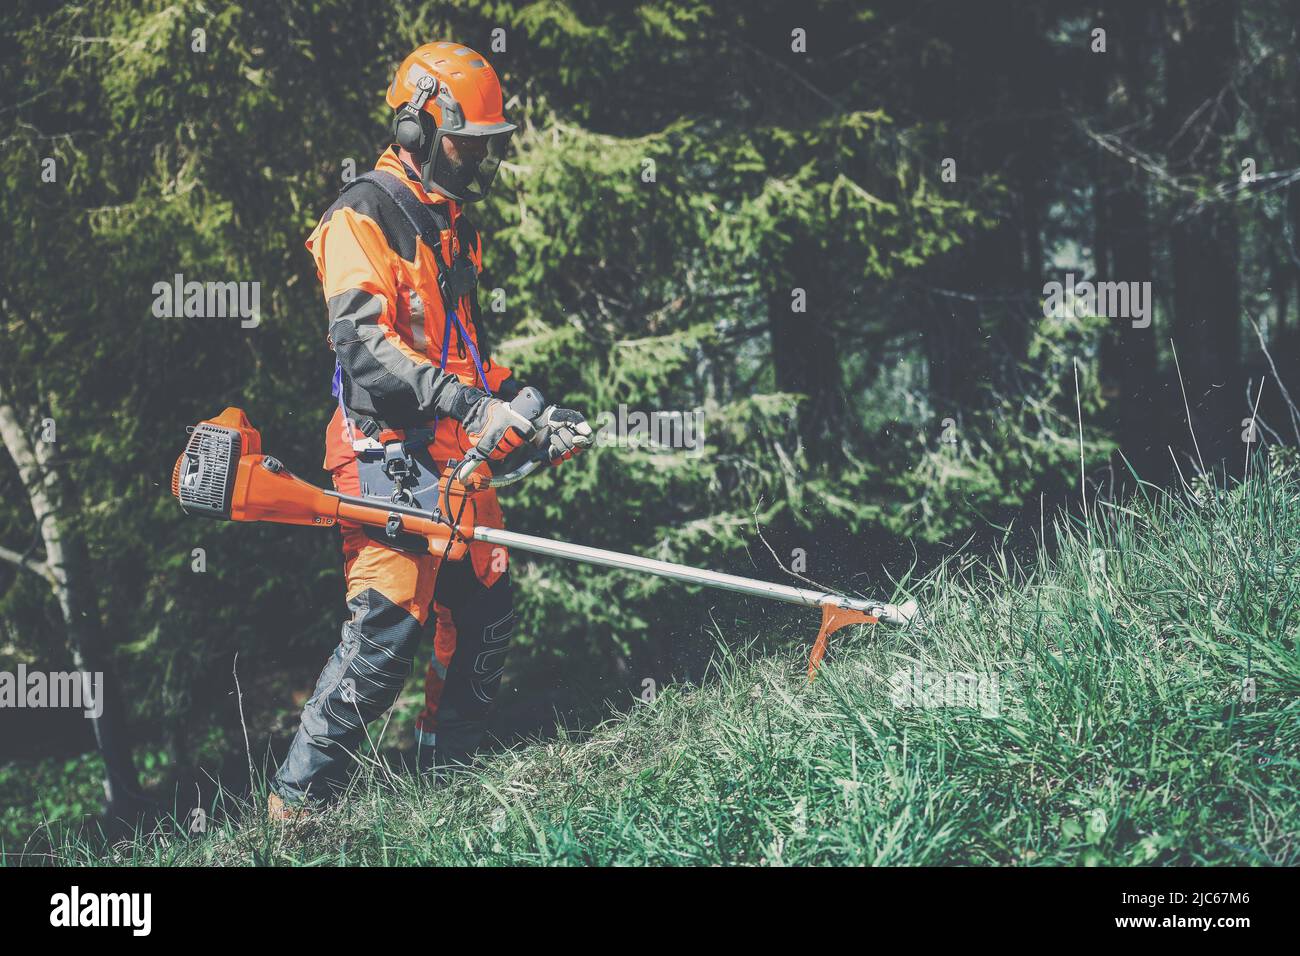 Man holding a brushcutter cut grass and brush. Lumberjack at work wears orange personal protective equipment. Gardener working outdoor in the forest. Stock Photo